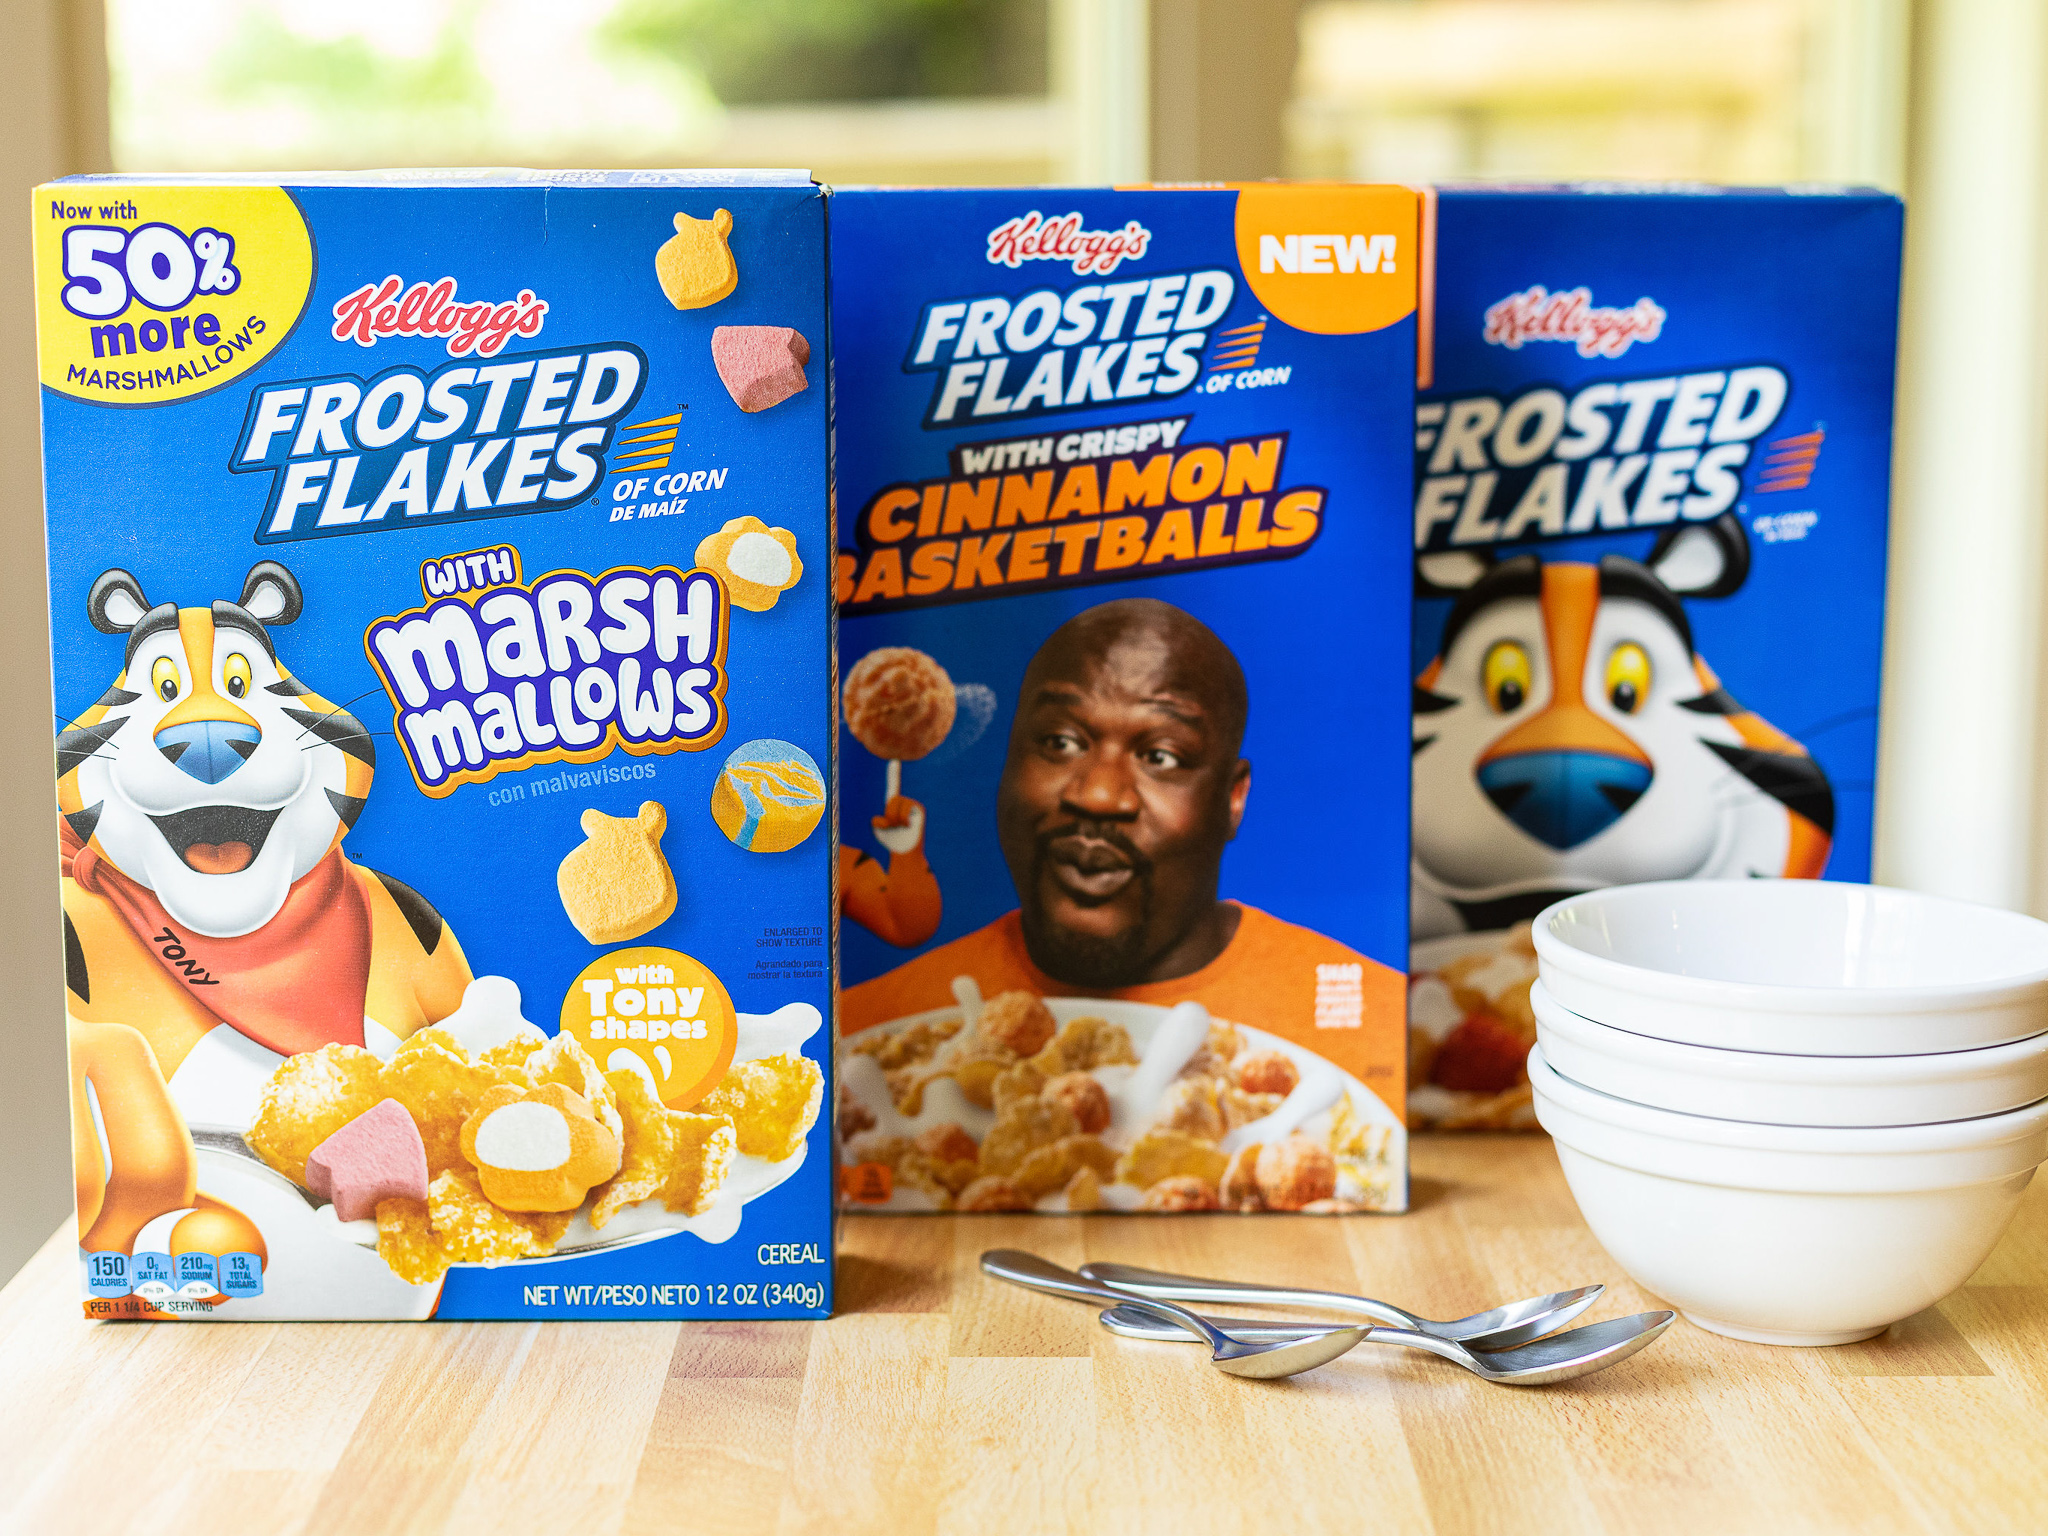 Join Mission Tiger To Keep Kids Playing - Your Frosted Flakes Purchase Can Provide A $2 Donation To Support Kids Sports on I Heart Publix